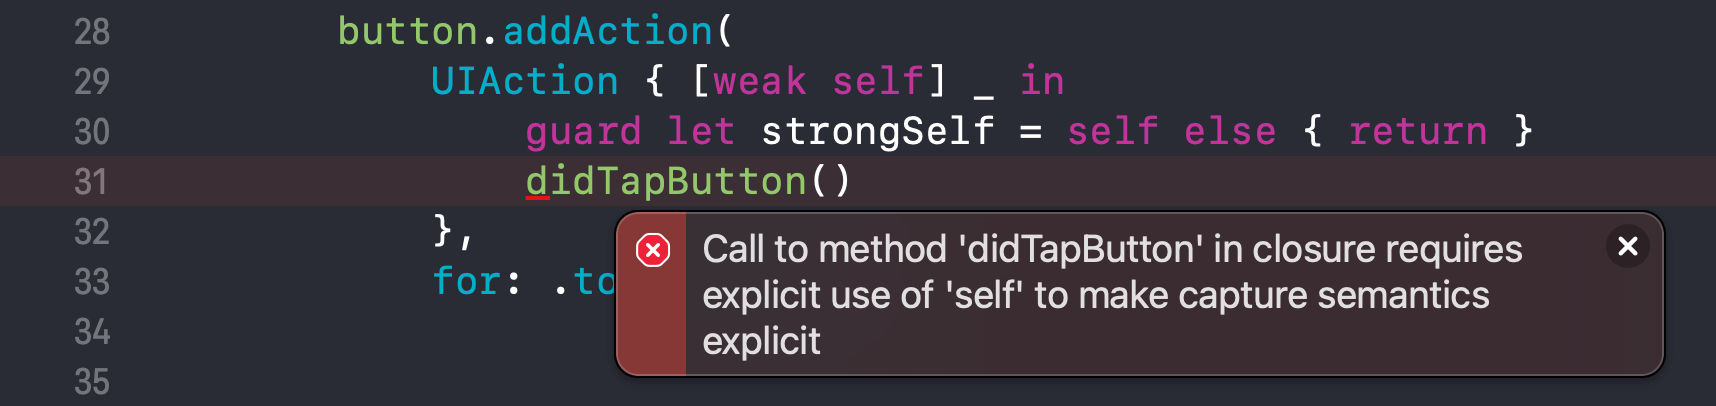 Call to method 'didTapButton' in closure requires explicit use of 'self' to make capture semantics explicit.